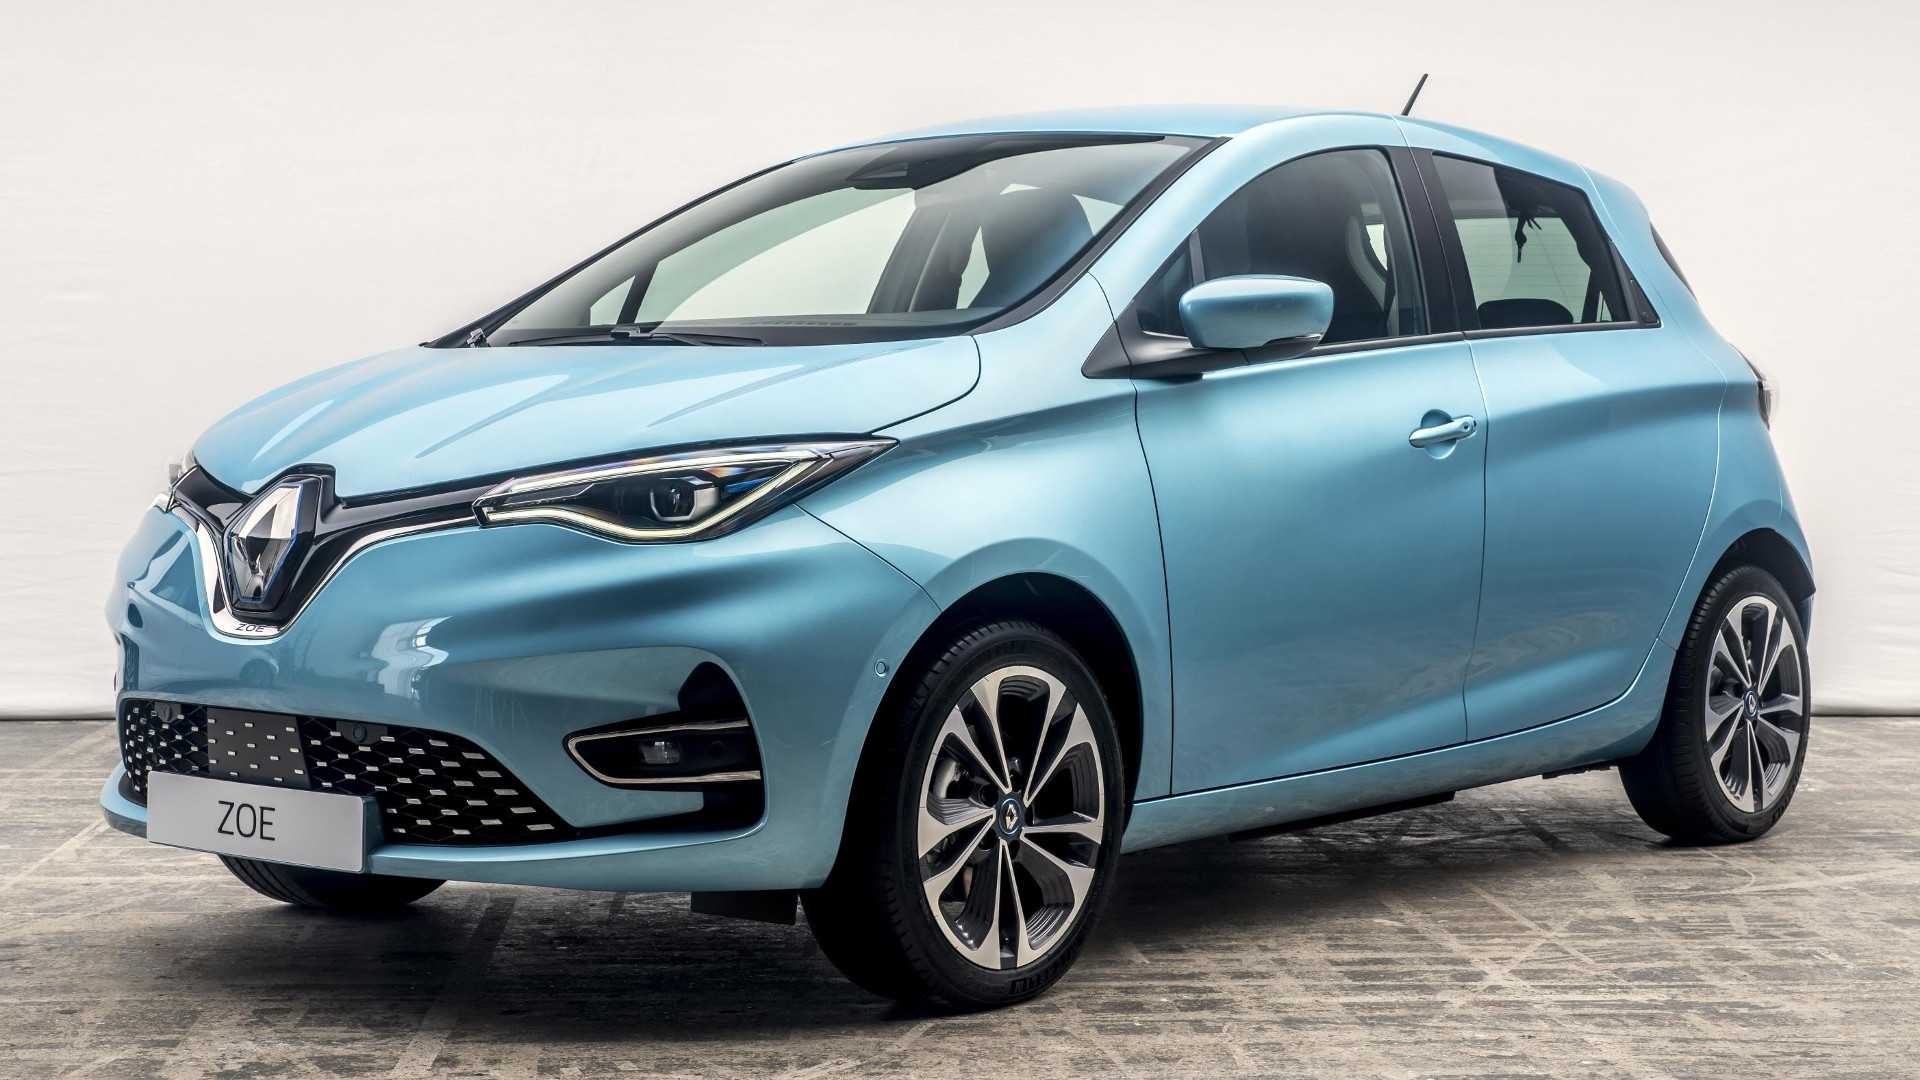 Prices of Top 8 Best Electric Cars for 2021 (Latest Update)